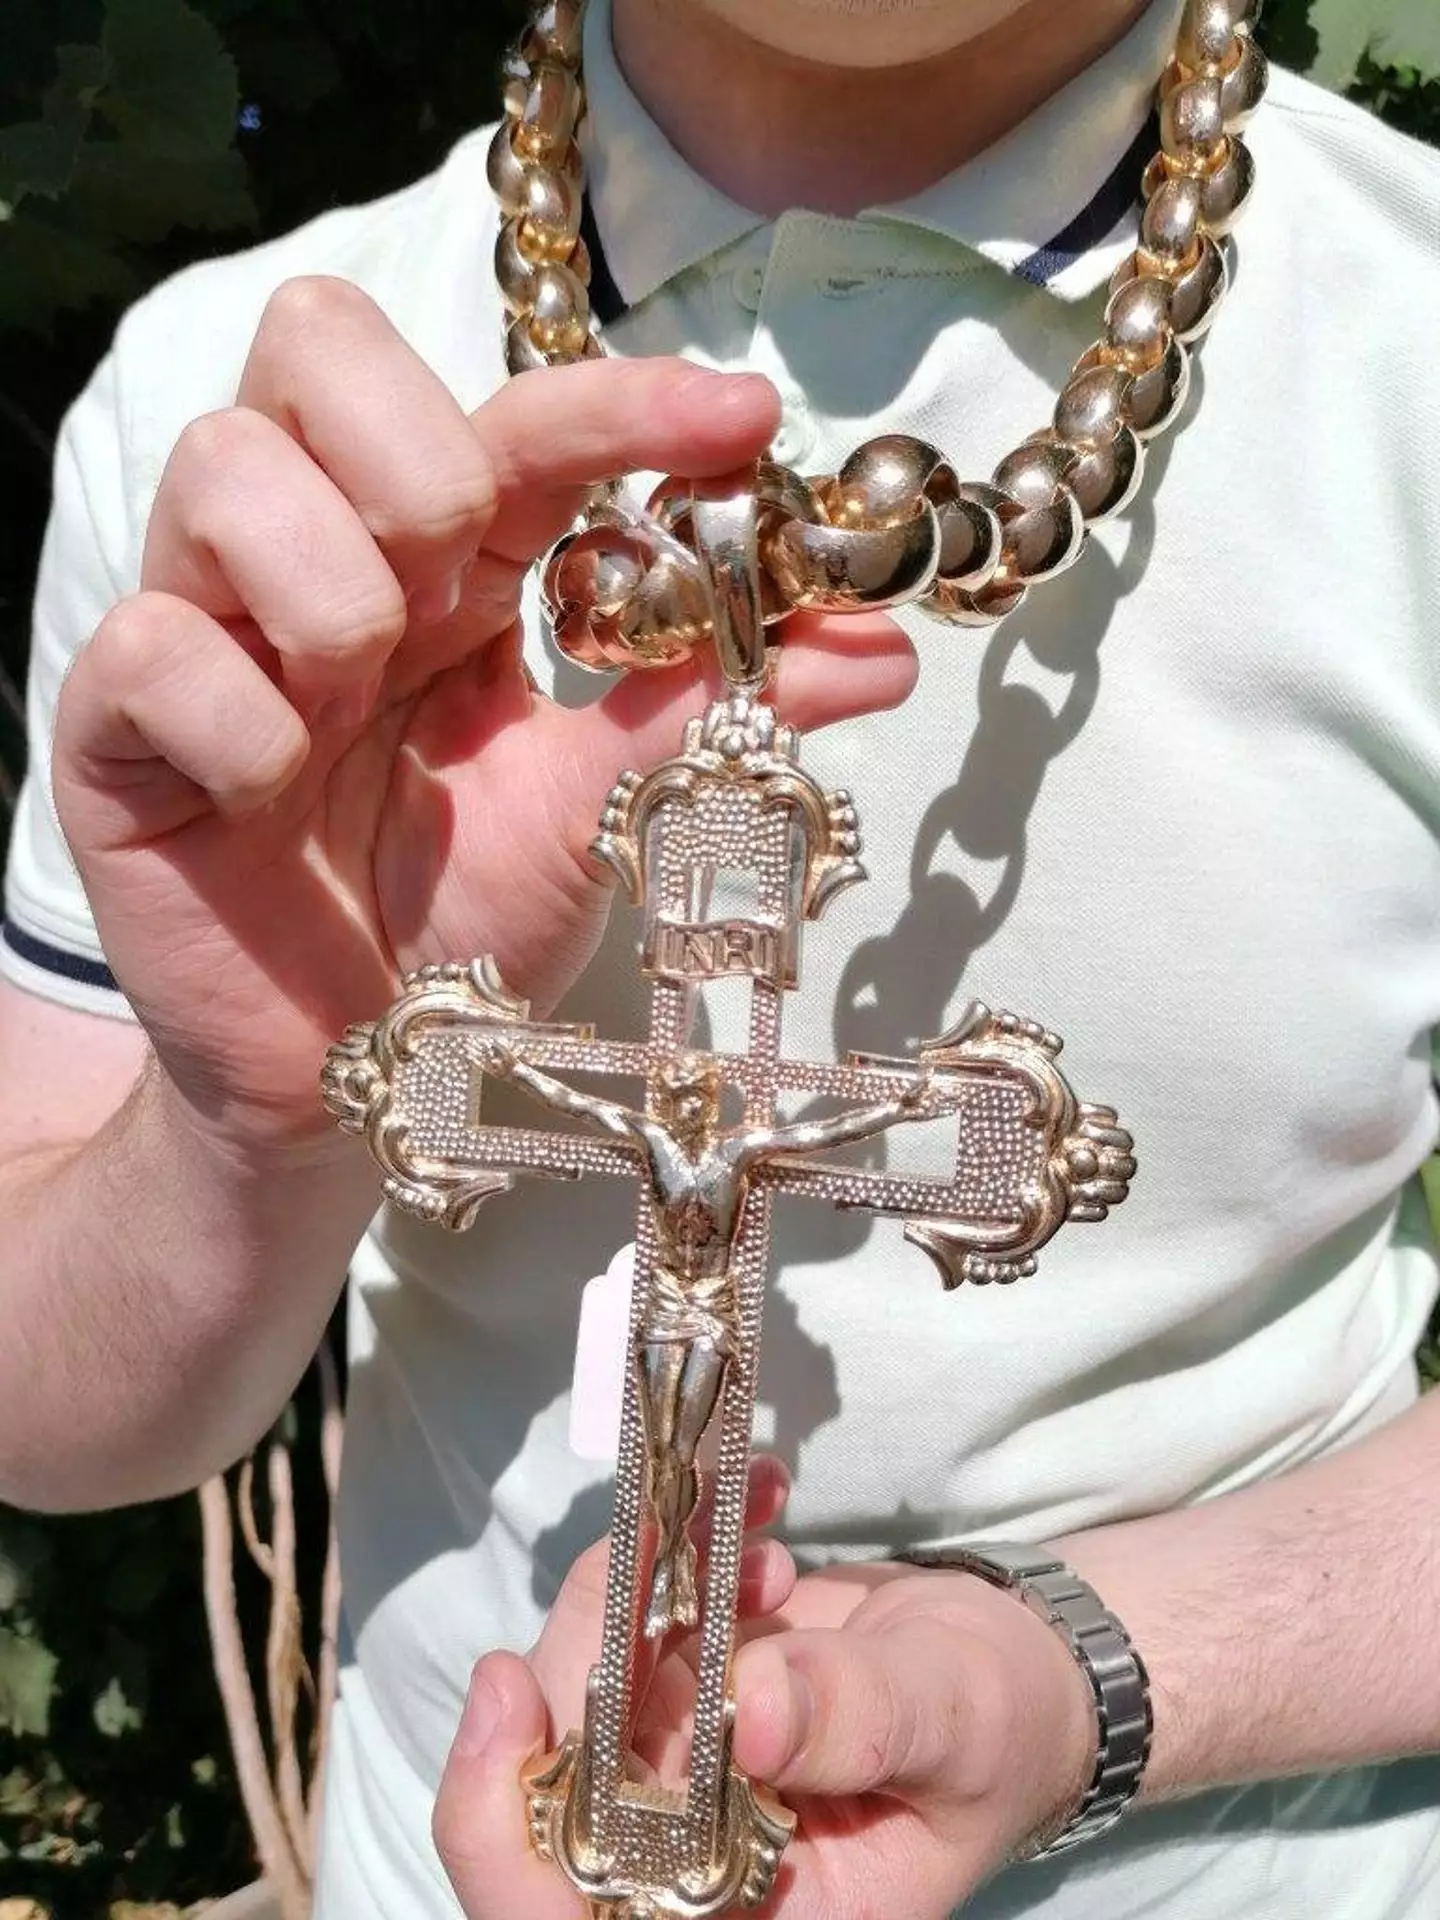 Andreo Montanino bought the gigantic crucifix and chain in honour of his late Roman Catholic grandmother.